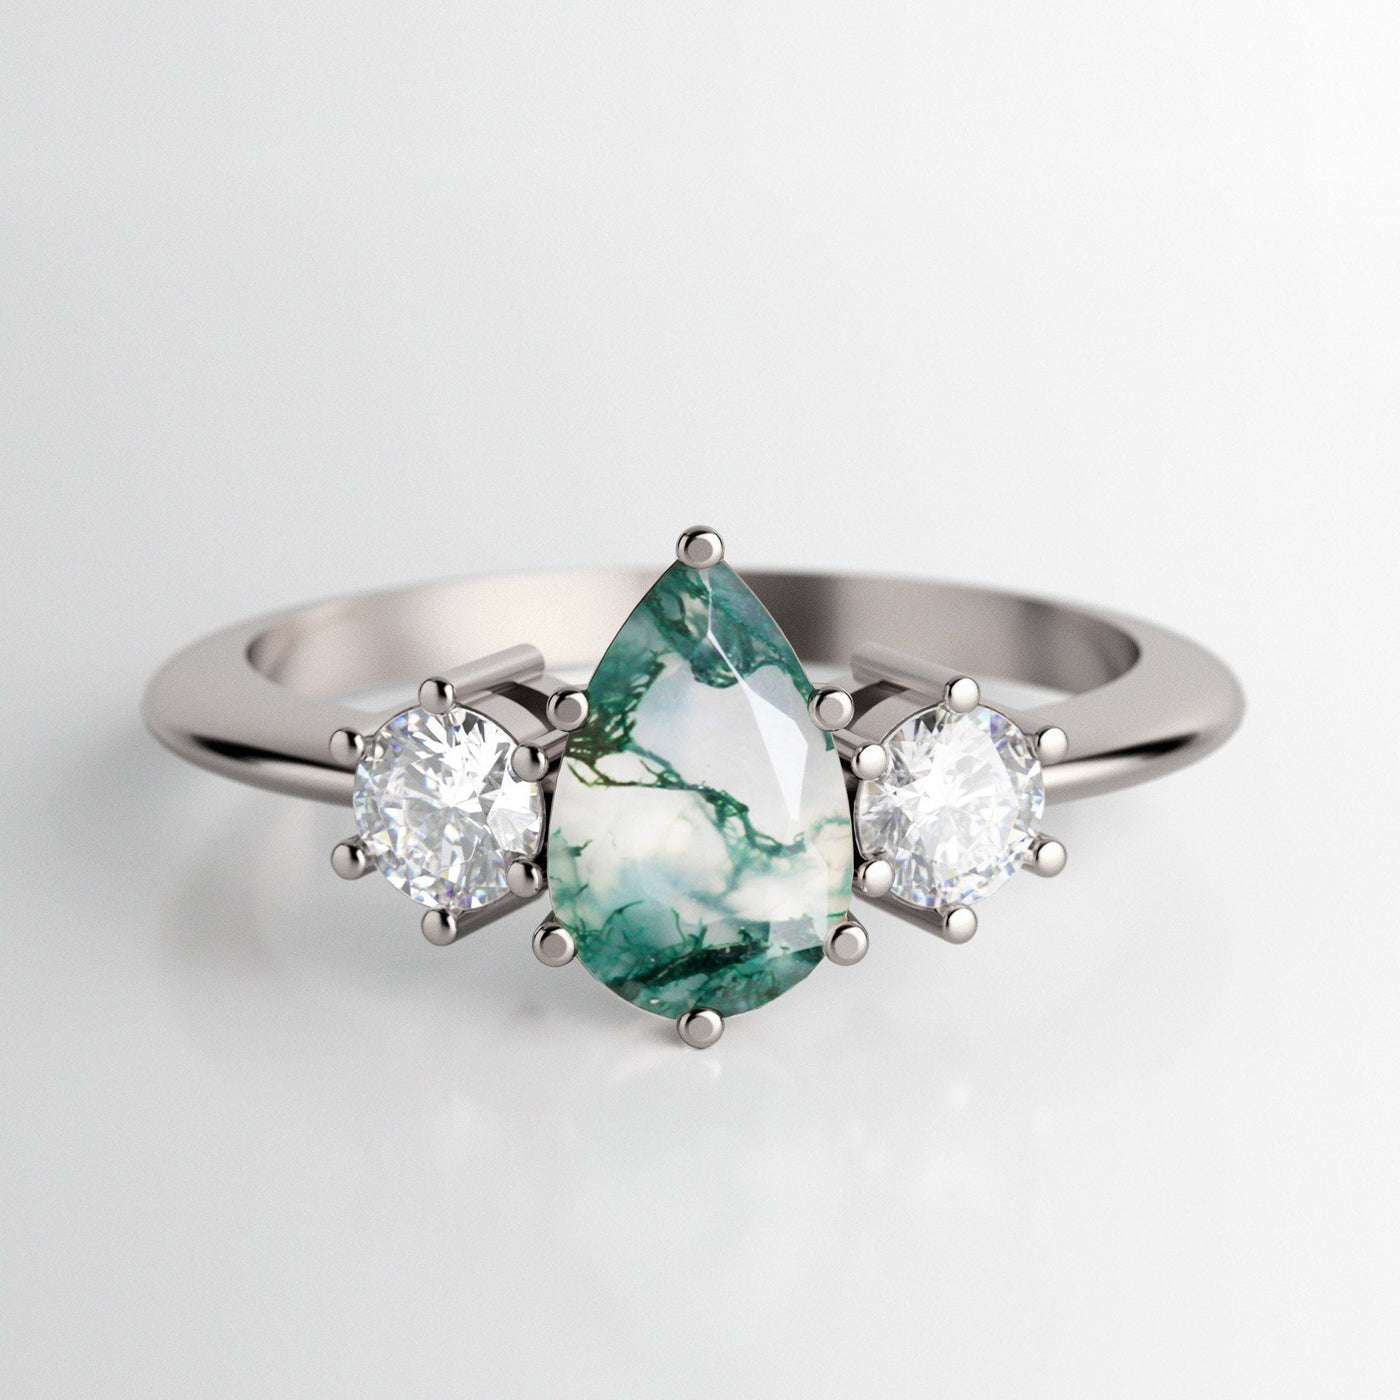 Green Pear Moss Agate, Platinum Ring with Accent Round White Diamonds